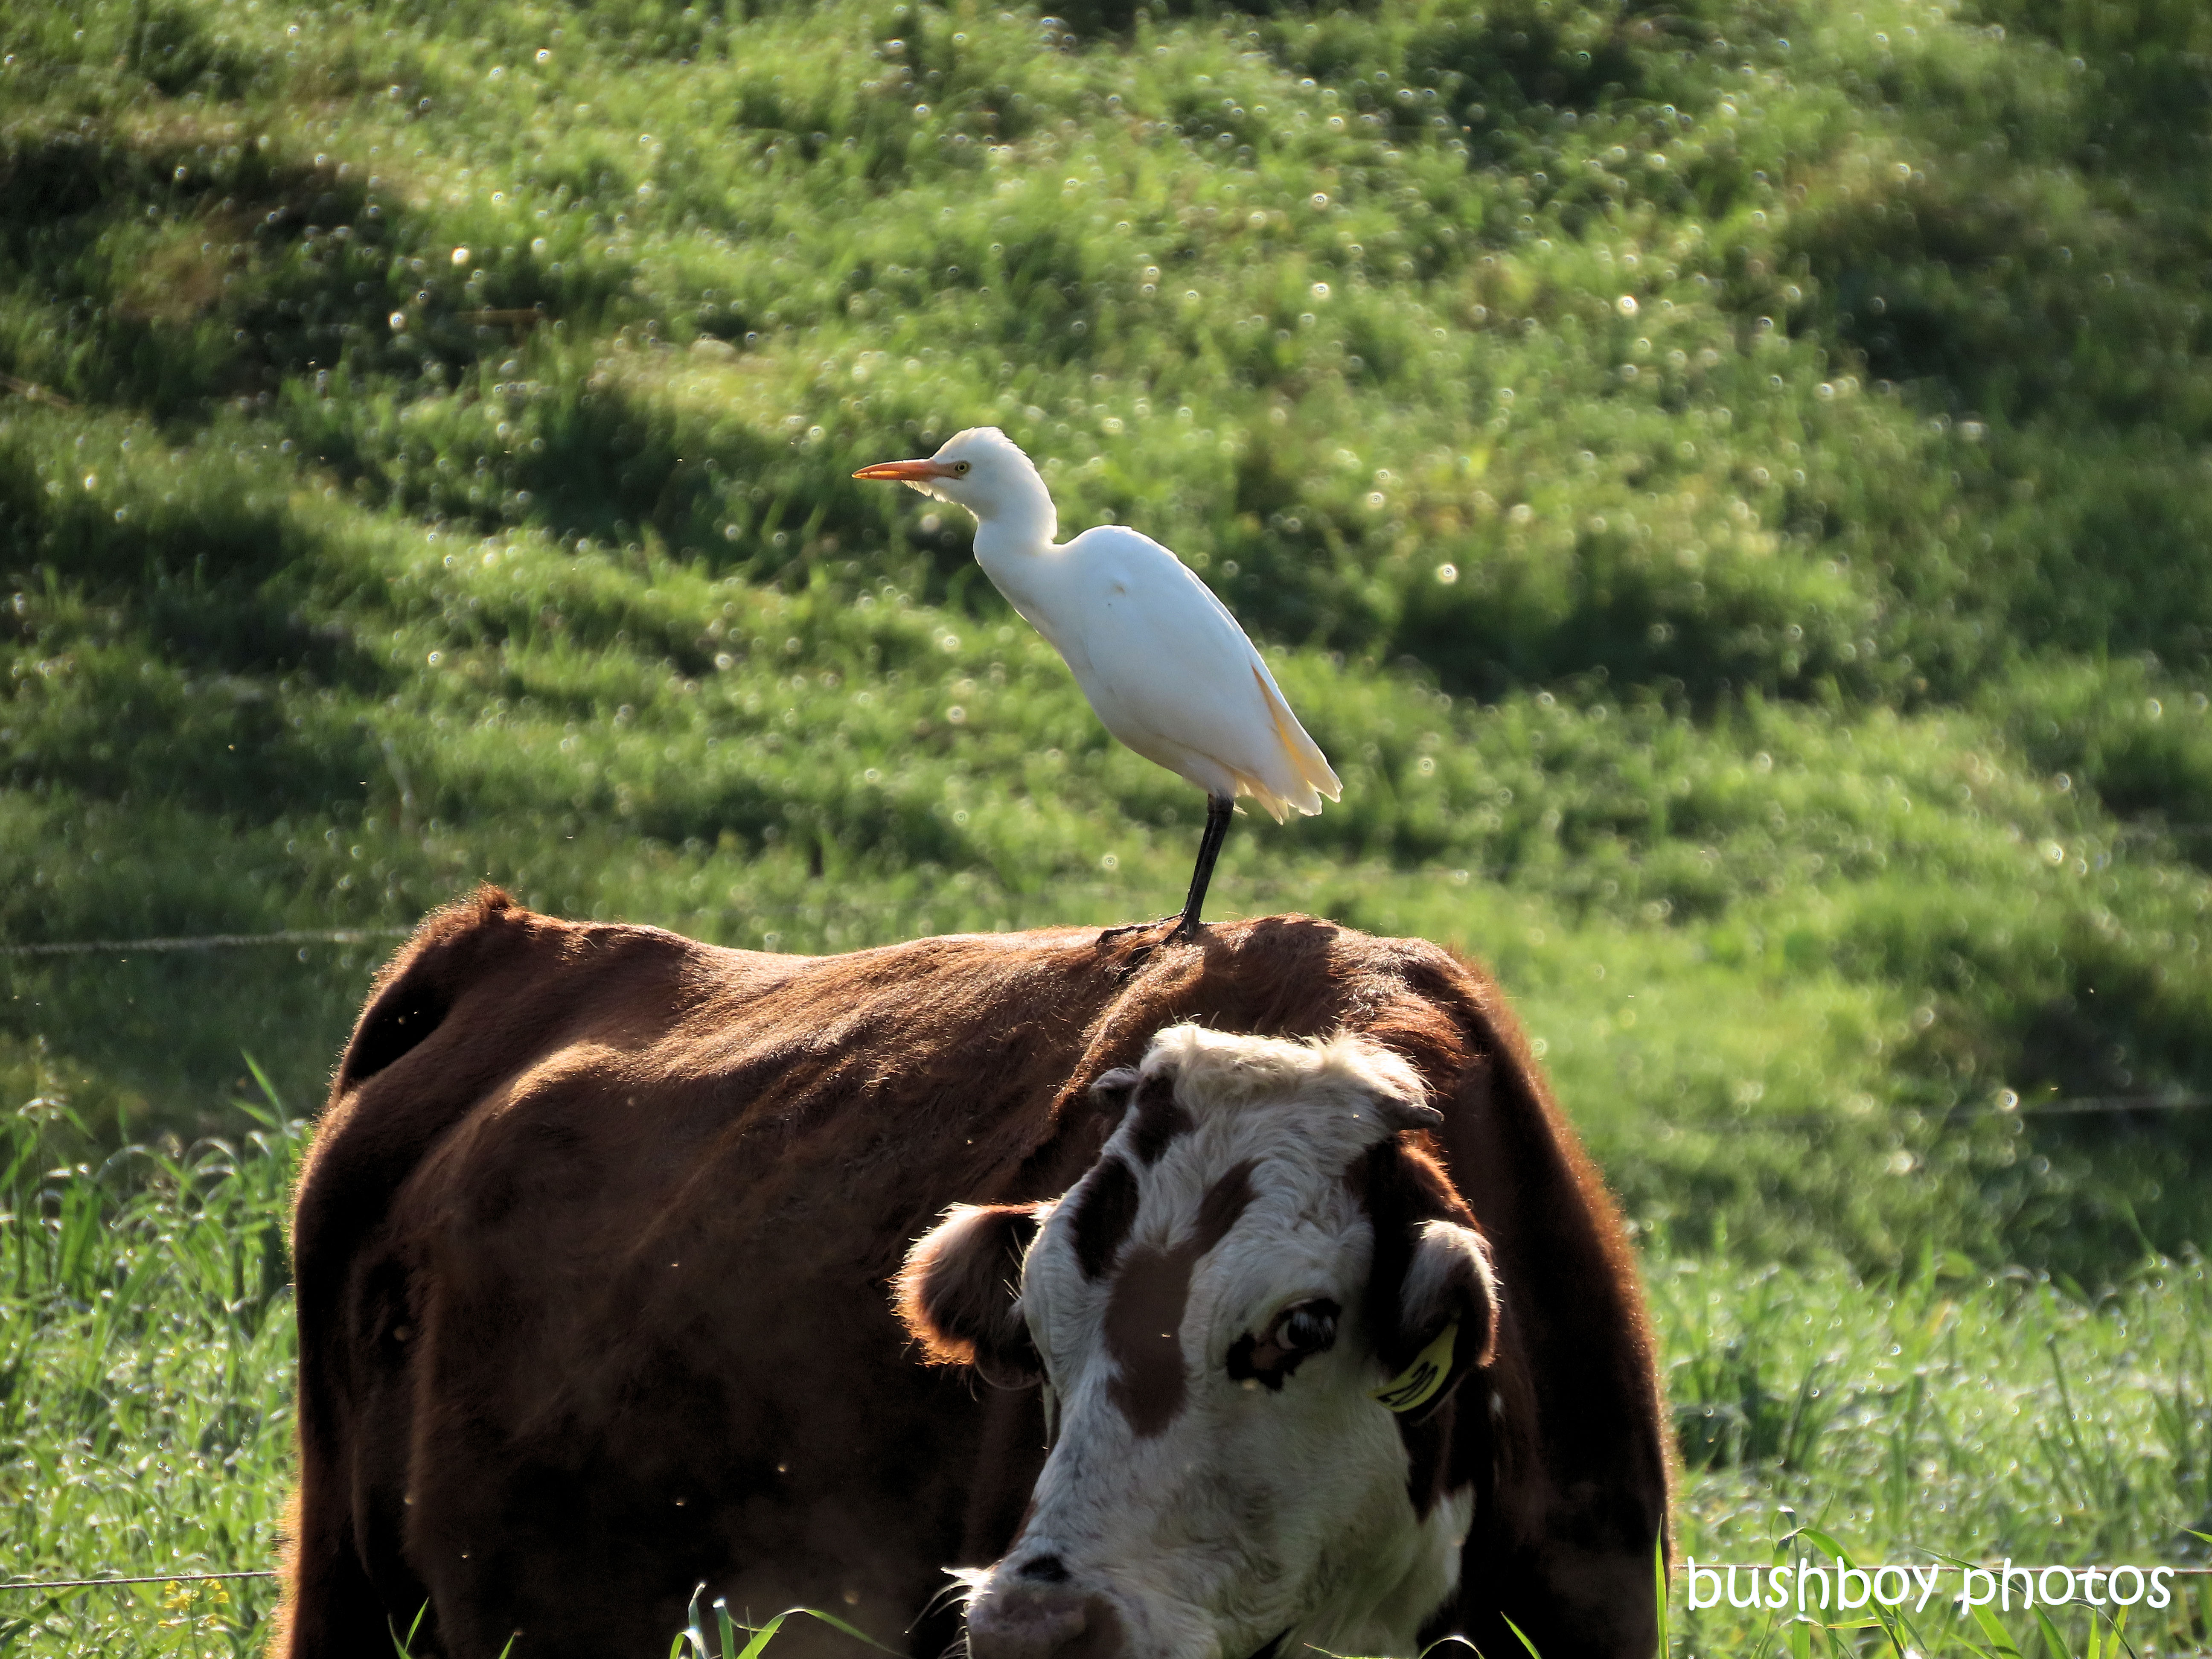 egret)cattle_standing_cow_farm_caniaba_july 2019